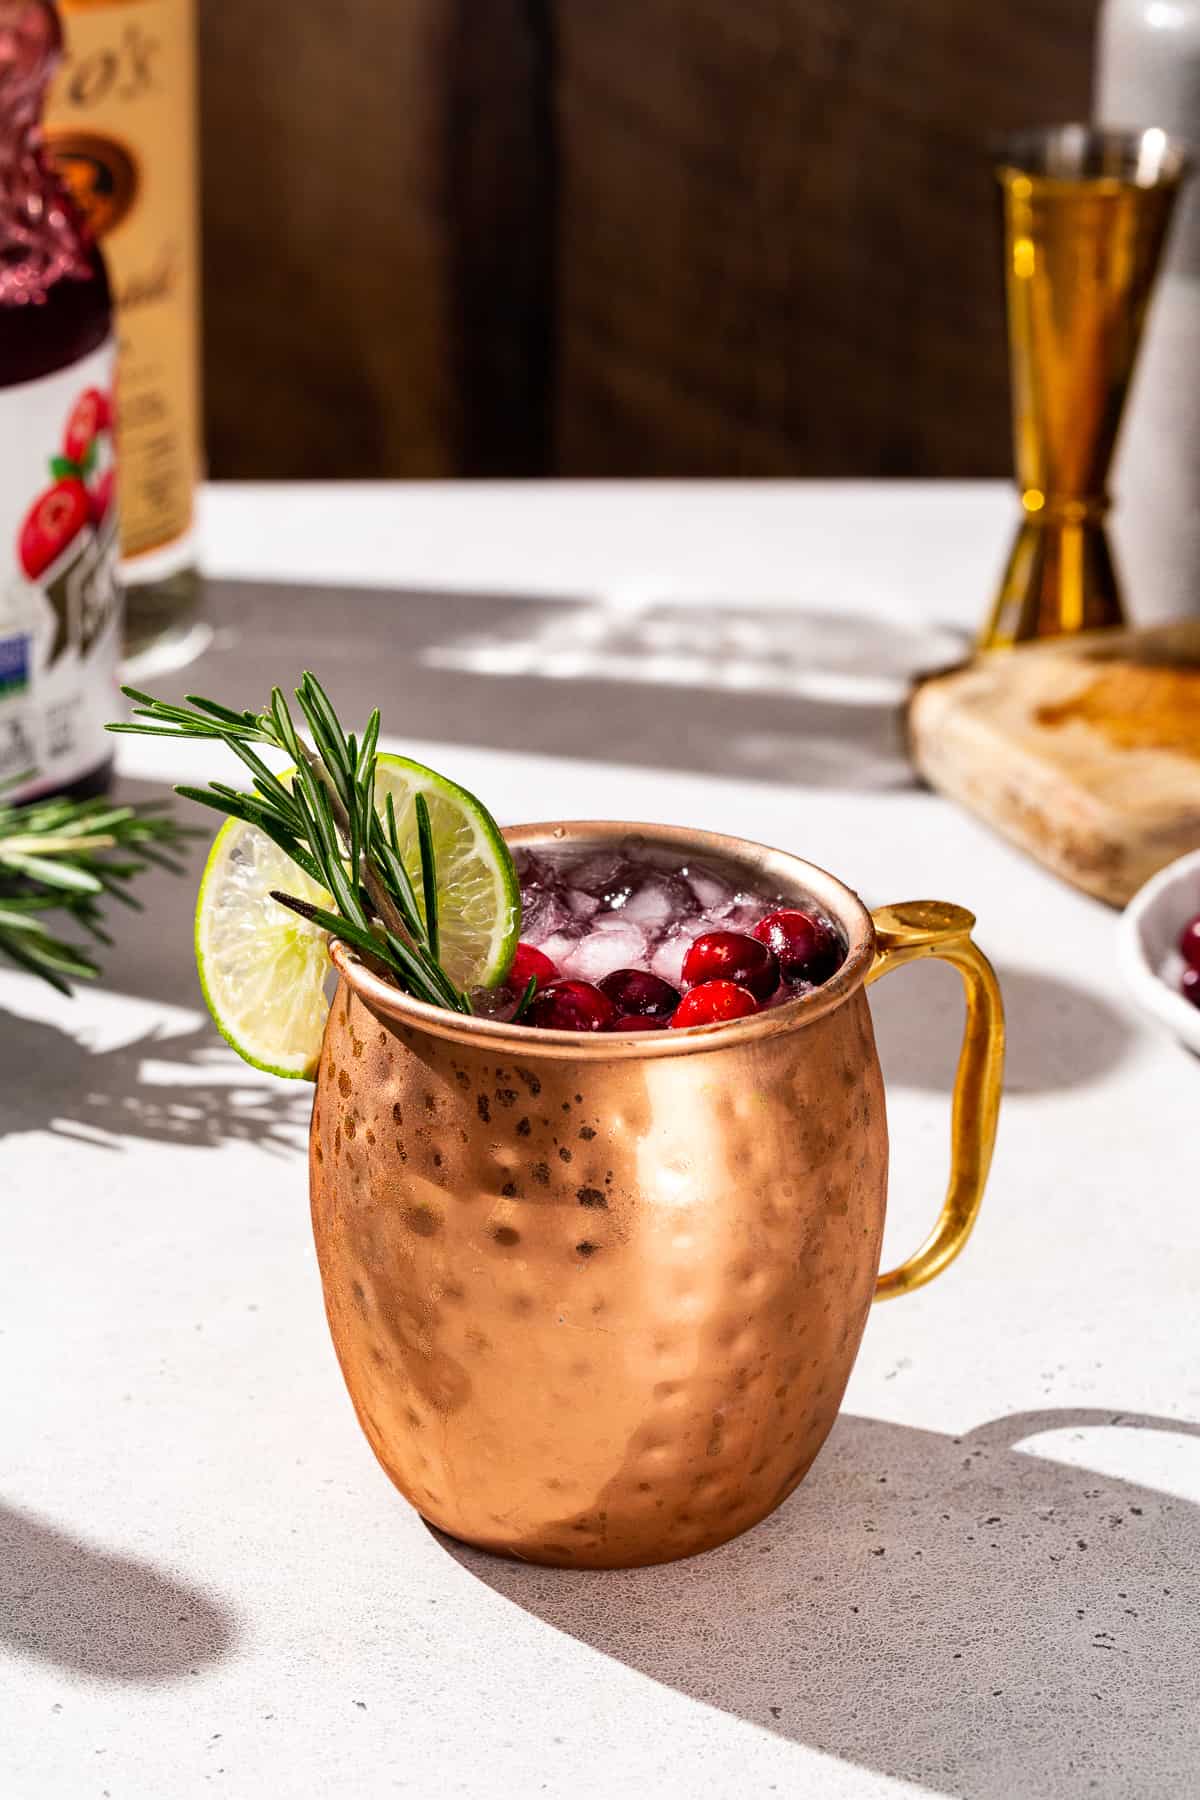 Side view of a Christmas Mule cocktail in a copper mug. The drink has cranberries floating in it along with a rosemary and lime garnish. Ingredients and bar tools are seen in the background.